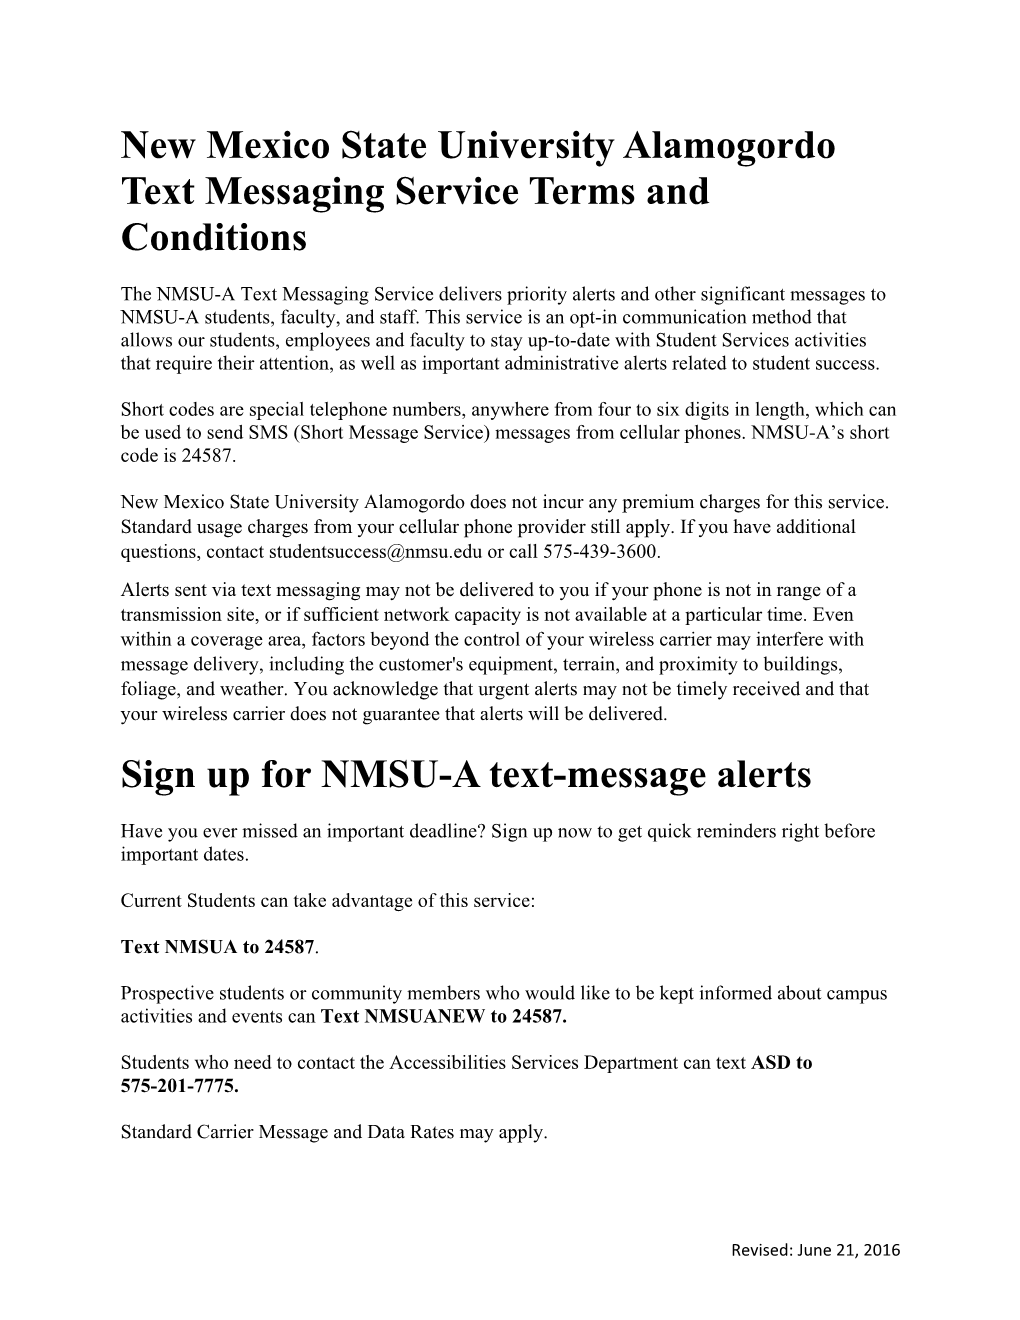 New Mexico State University Alamogordo Text Messaging Service Terms and Conditions